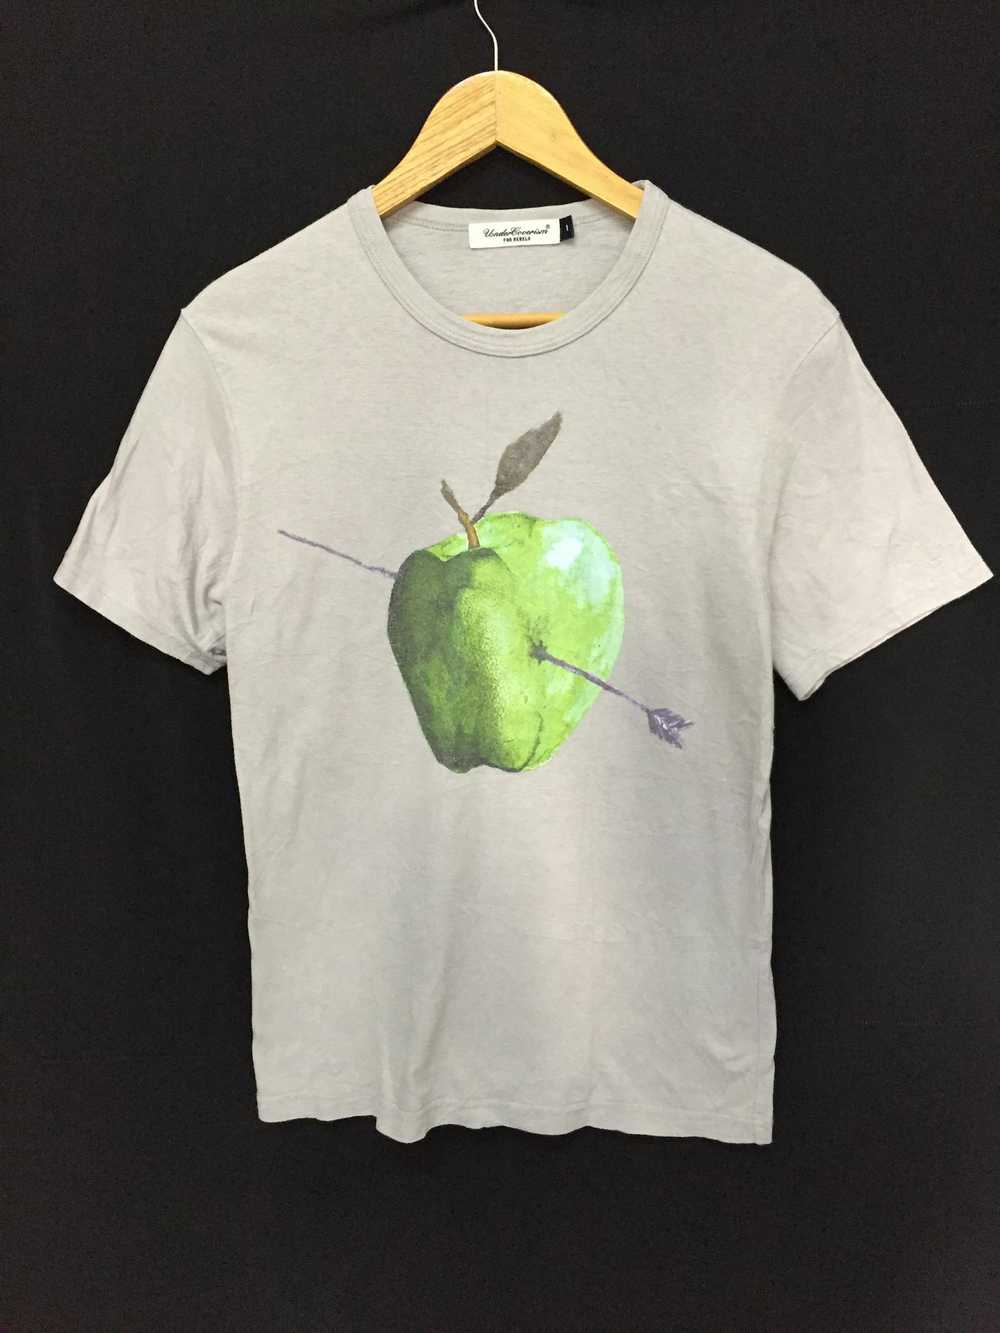 Undercover Undercover target apple tee - image 2